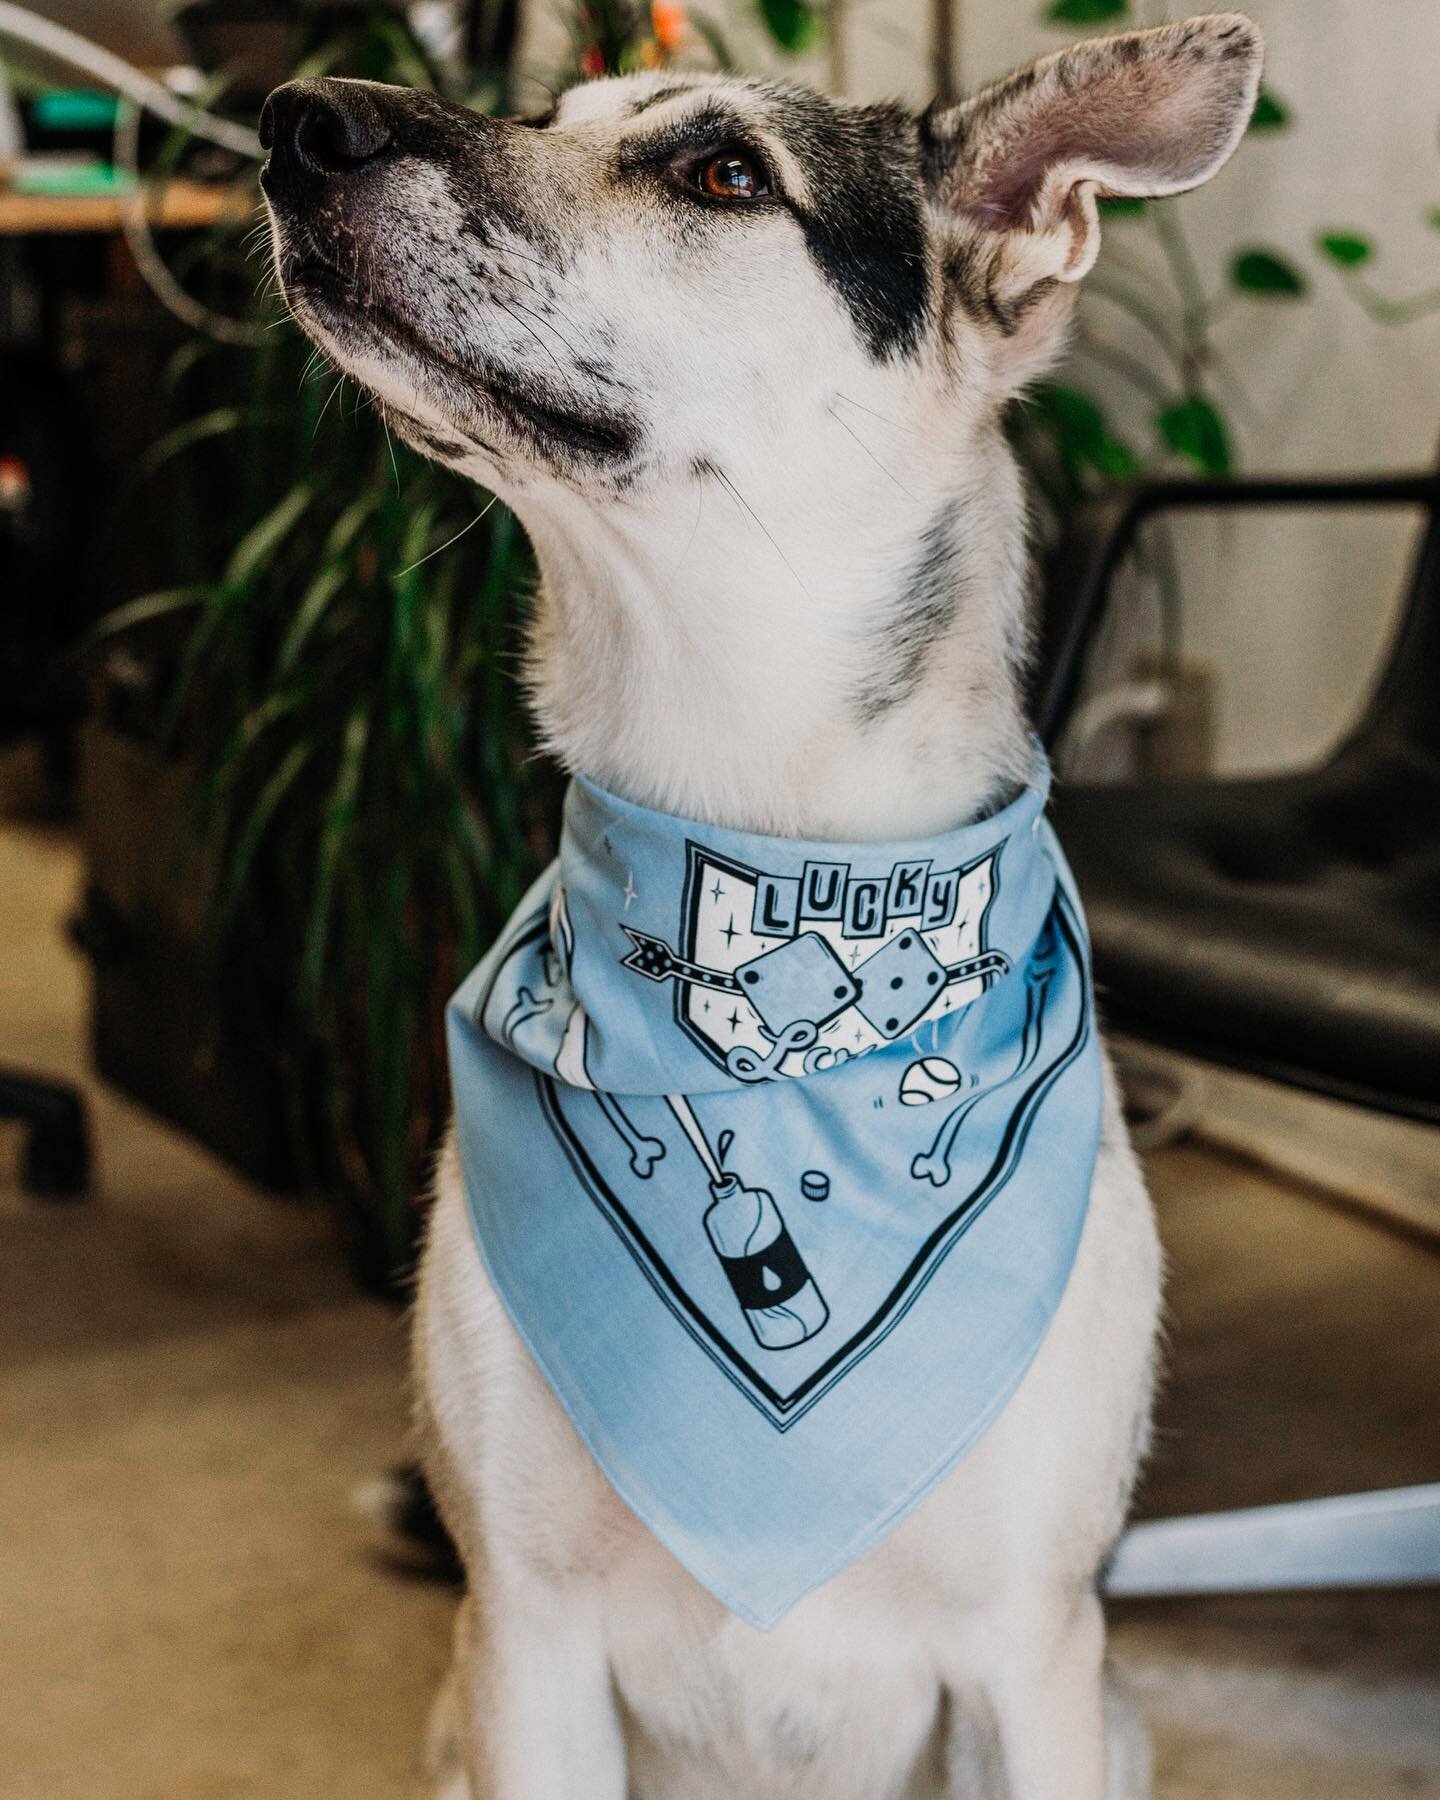 Tuesdays at @lucky_lous_bar from 6-9 is hound happy hour 🍻 
Here&rsquo;s these cuties showing wearing their lucky lous dog bandanas 

#dogbandana #dogsofinstagram #denton #dentontx #screenprinting